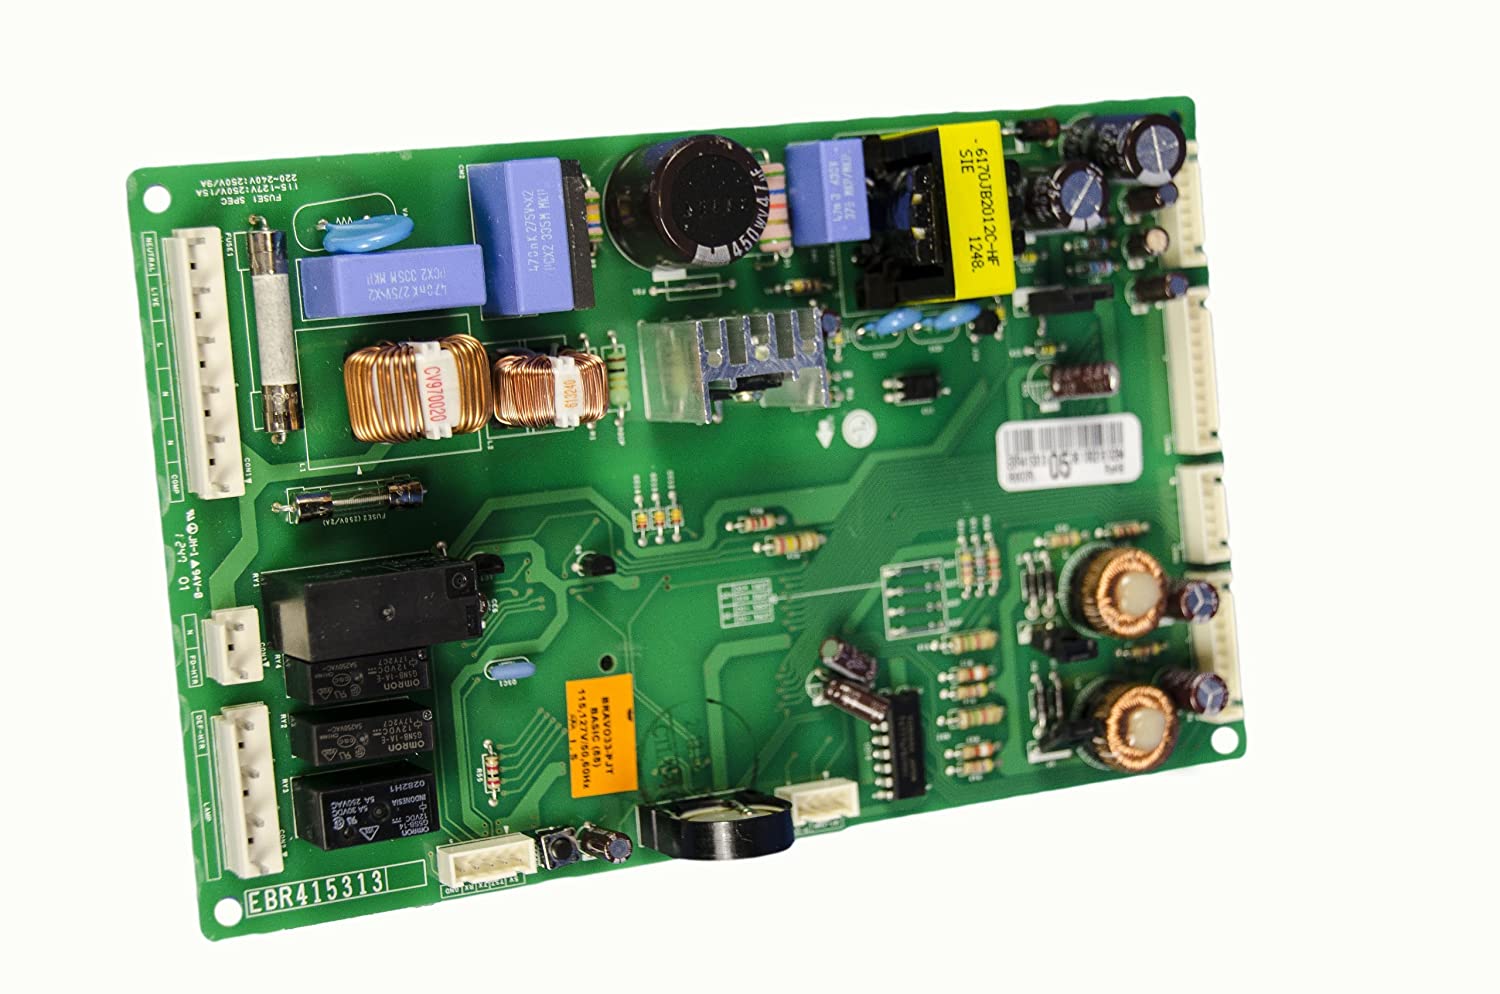 LG Refrigerator Electronic Control Board Assembly. Part #EBR41531305